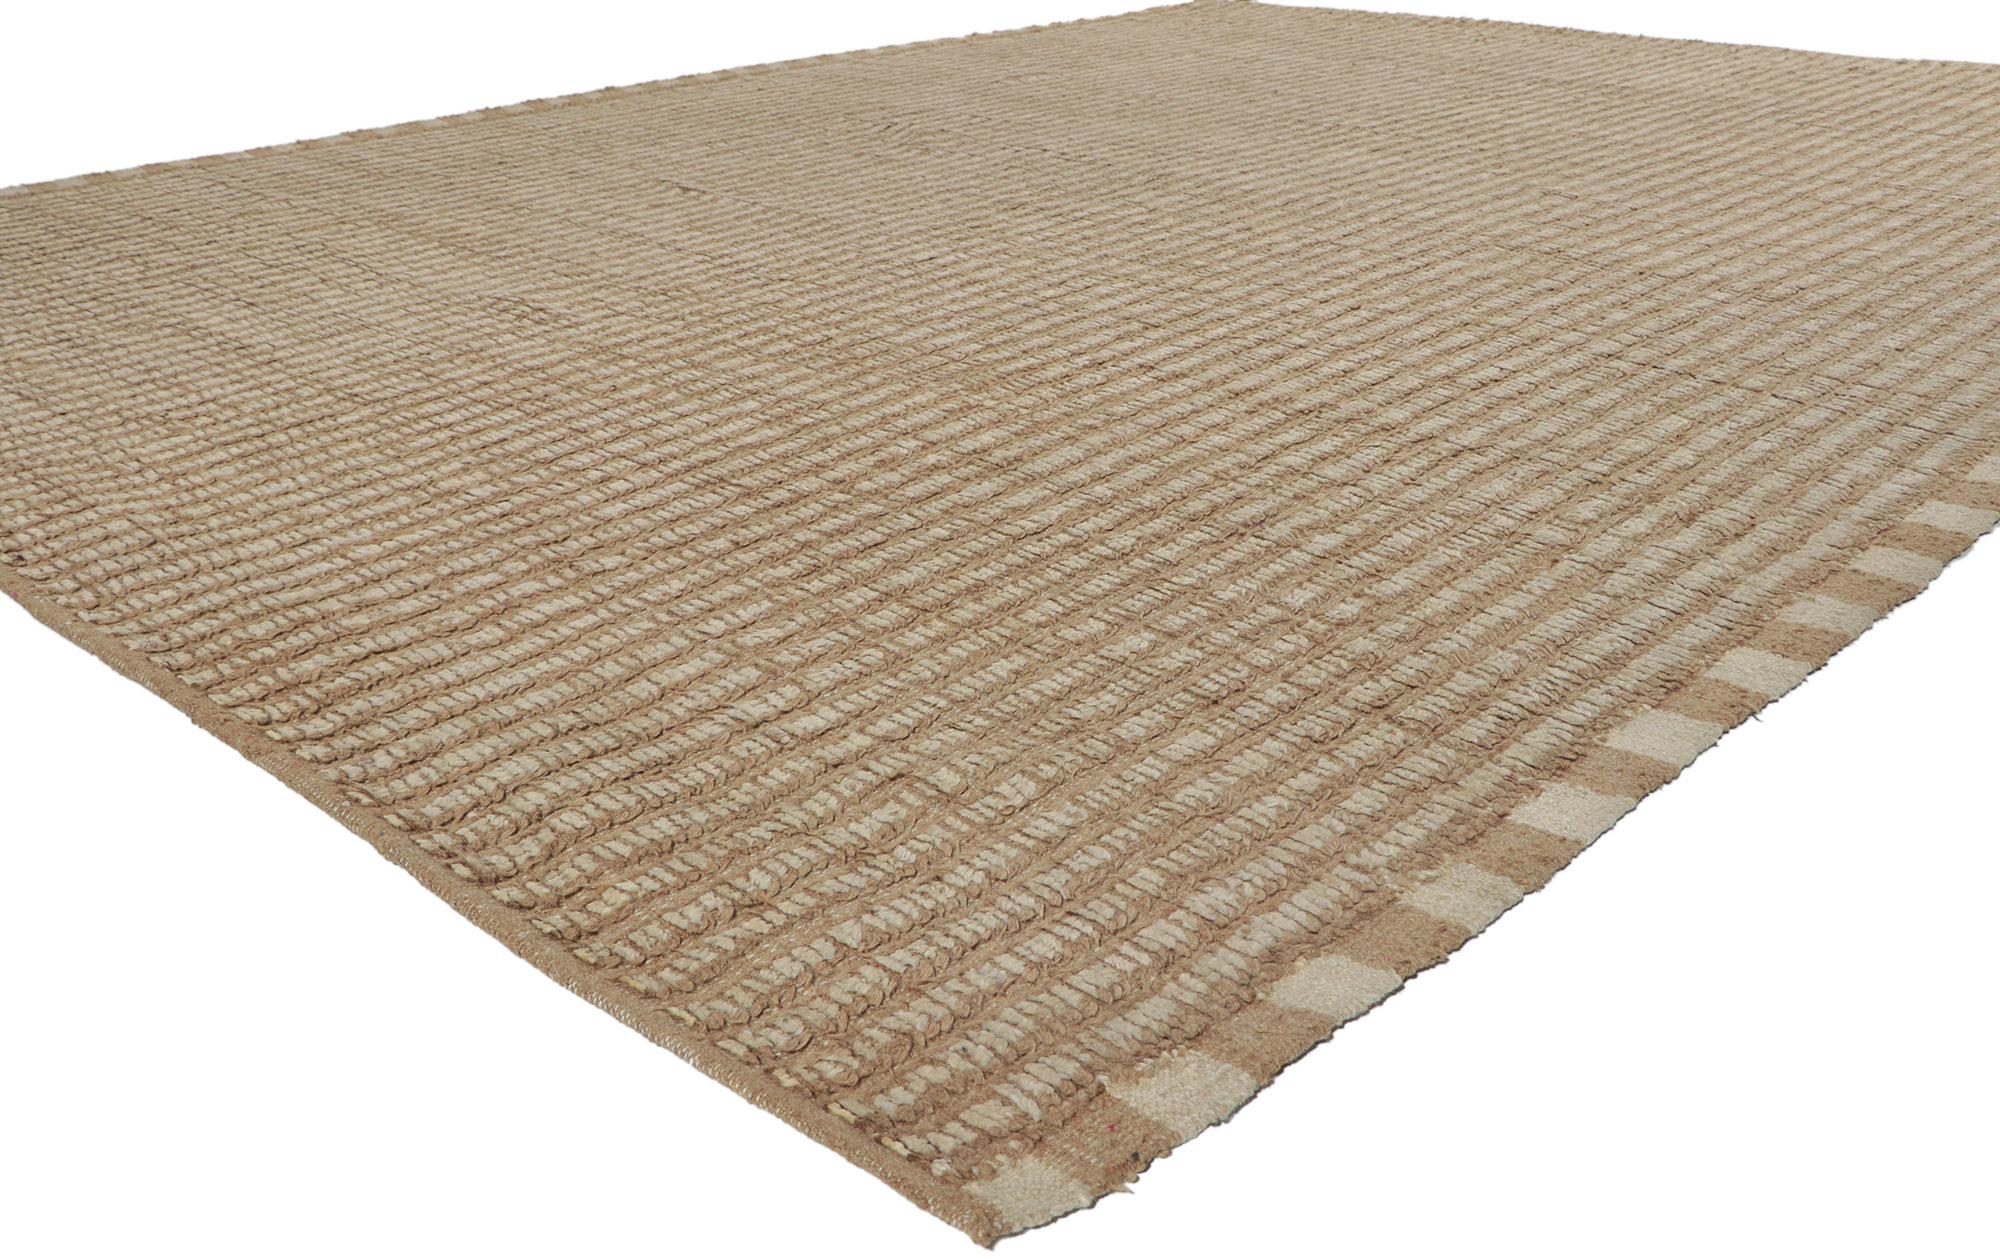 80805 New Contemporary Moroccan Style Rug with Short Pile, 09'00 x 12'00. With its simplicity, incredible detail and texture, this hand knotted wool contemporary Moroccan rug is a captivating vision of woven beauty. The subtle stripe pattern and